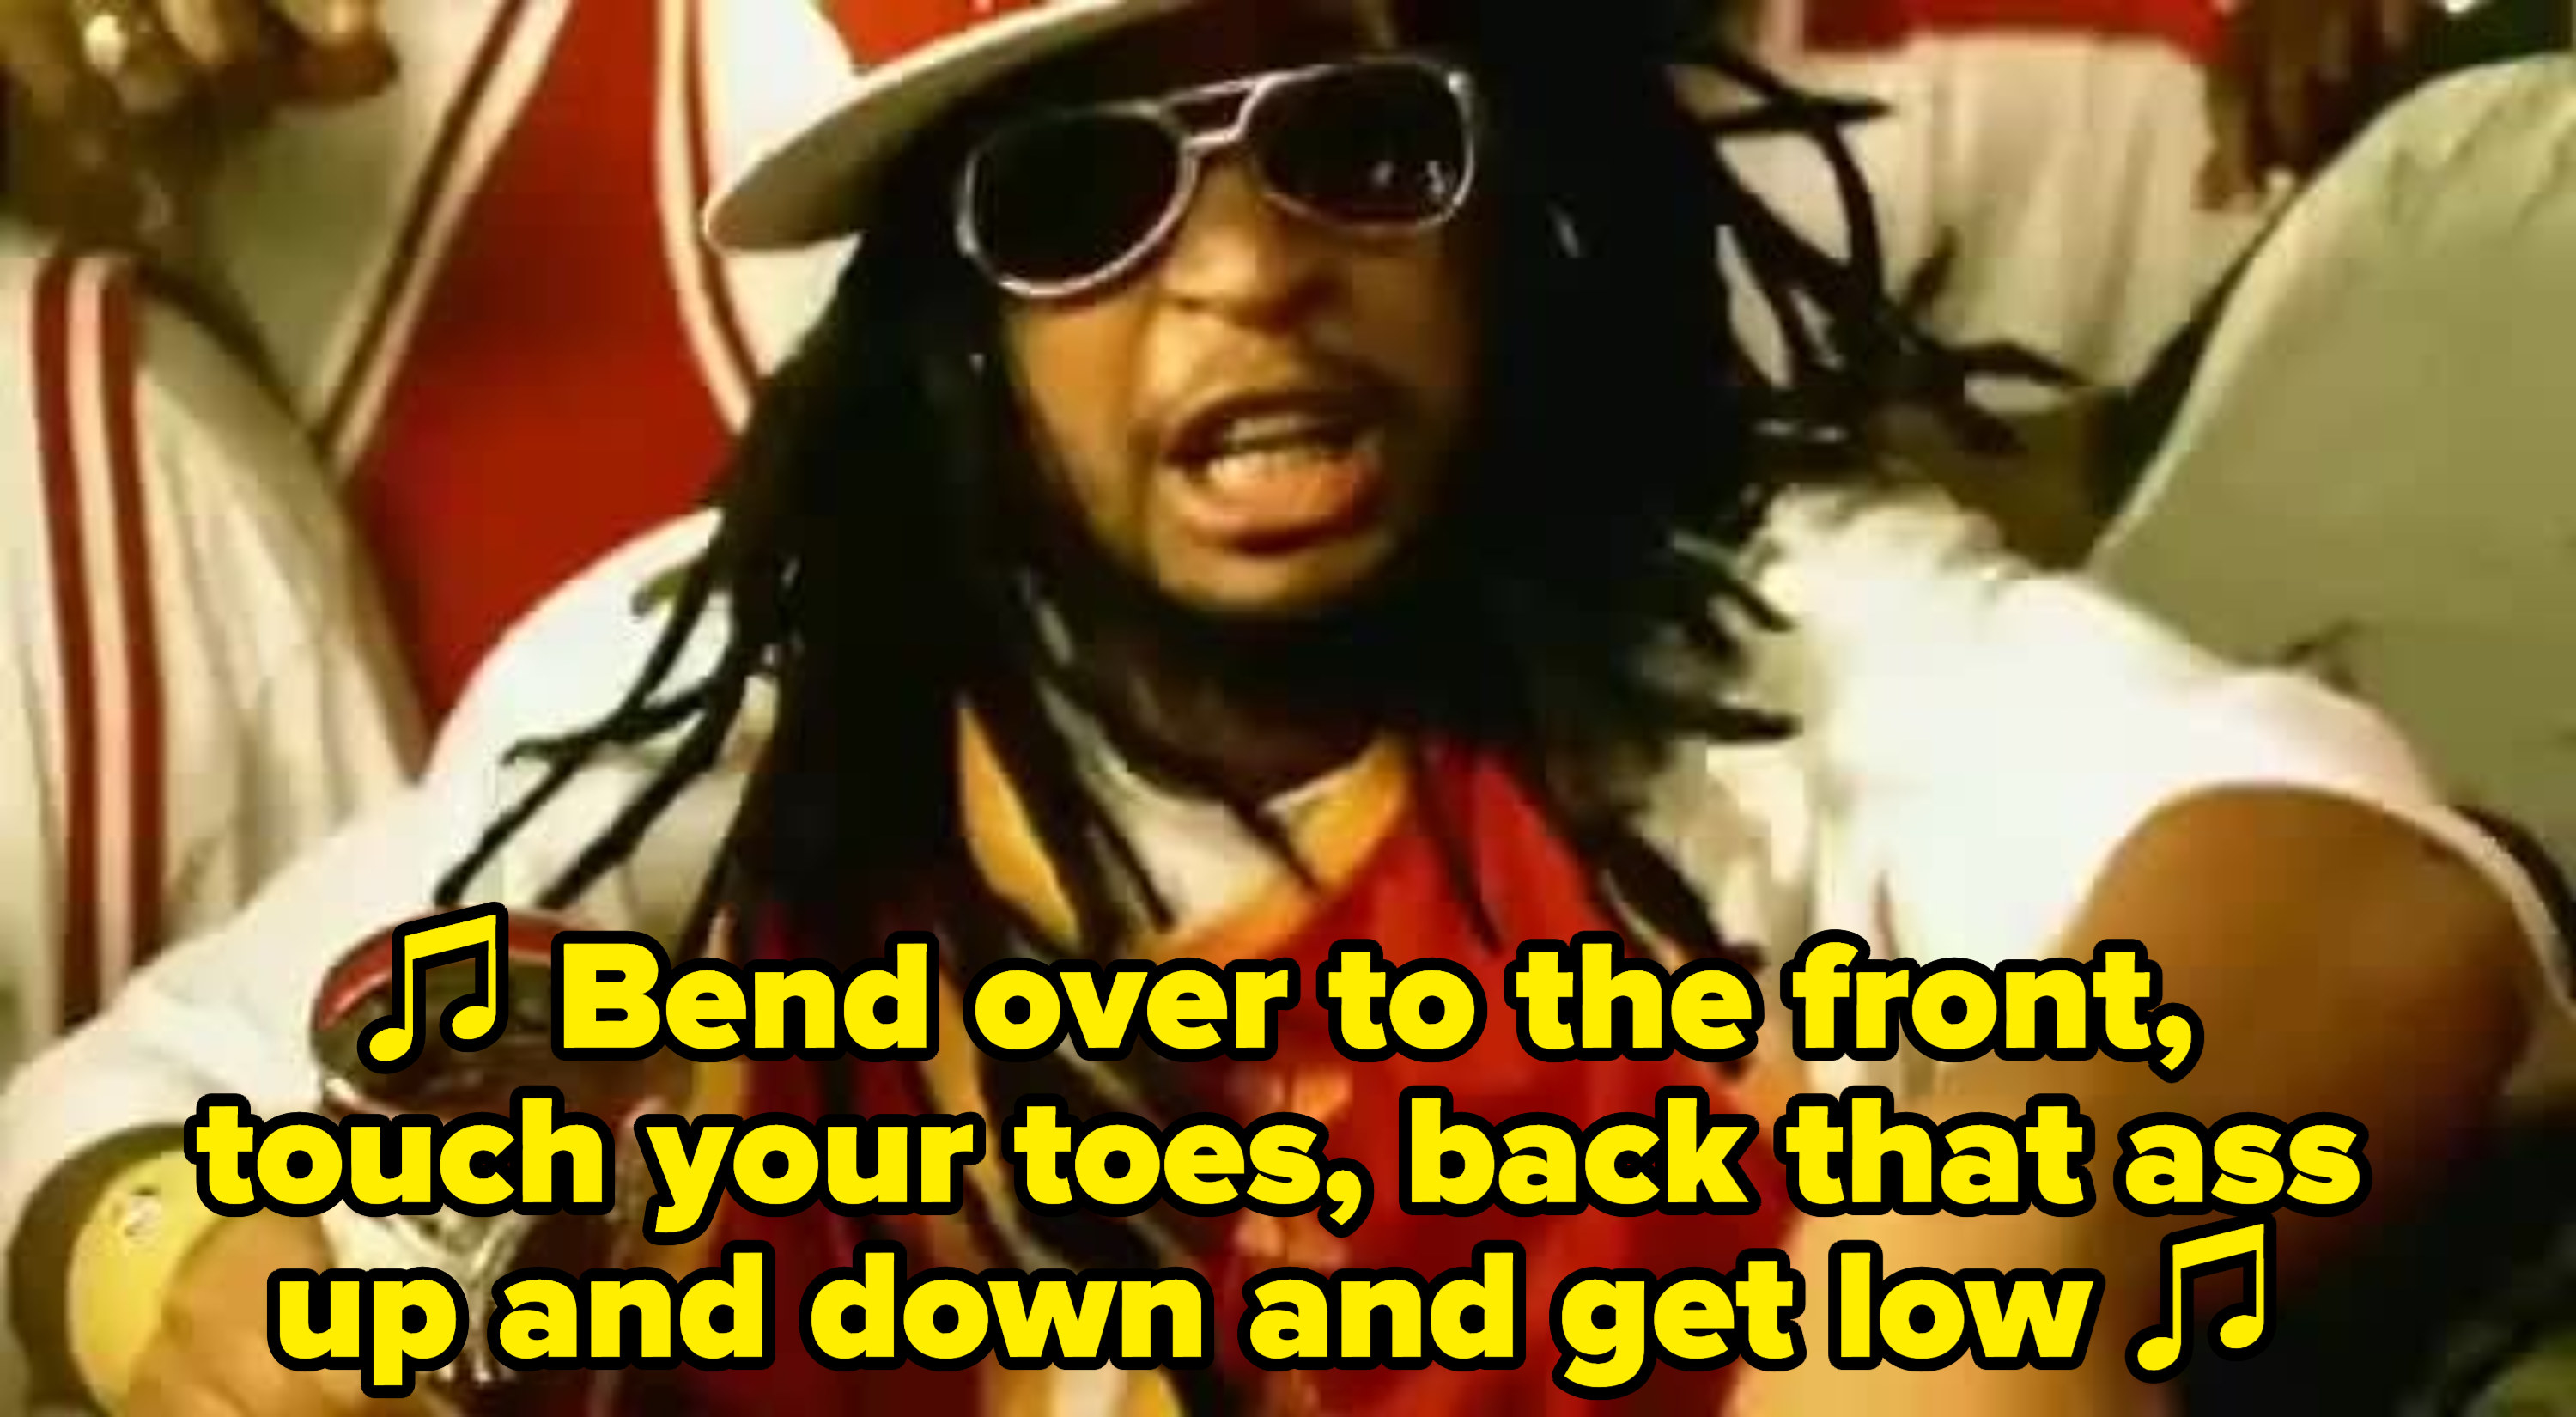 Lil Jon and the East Side Boyz rapping: &quot;Bend over to the front, touch your toes, back that ass up and down and get low&quot;